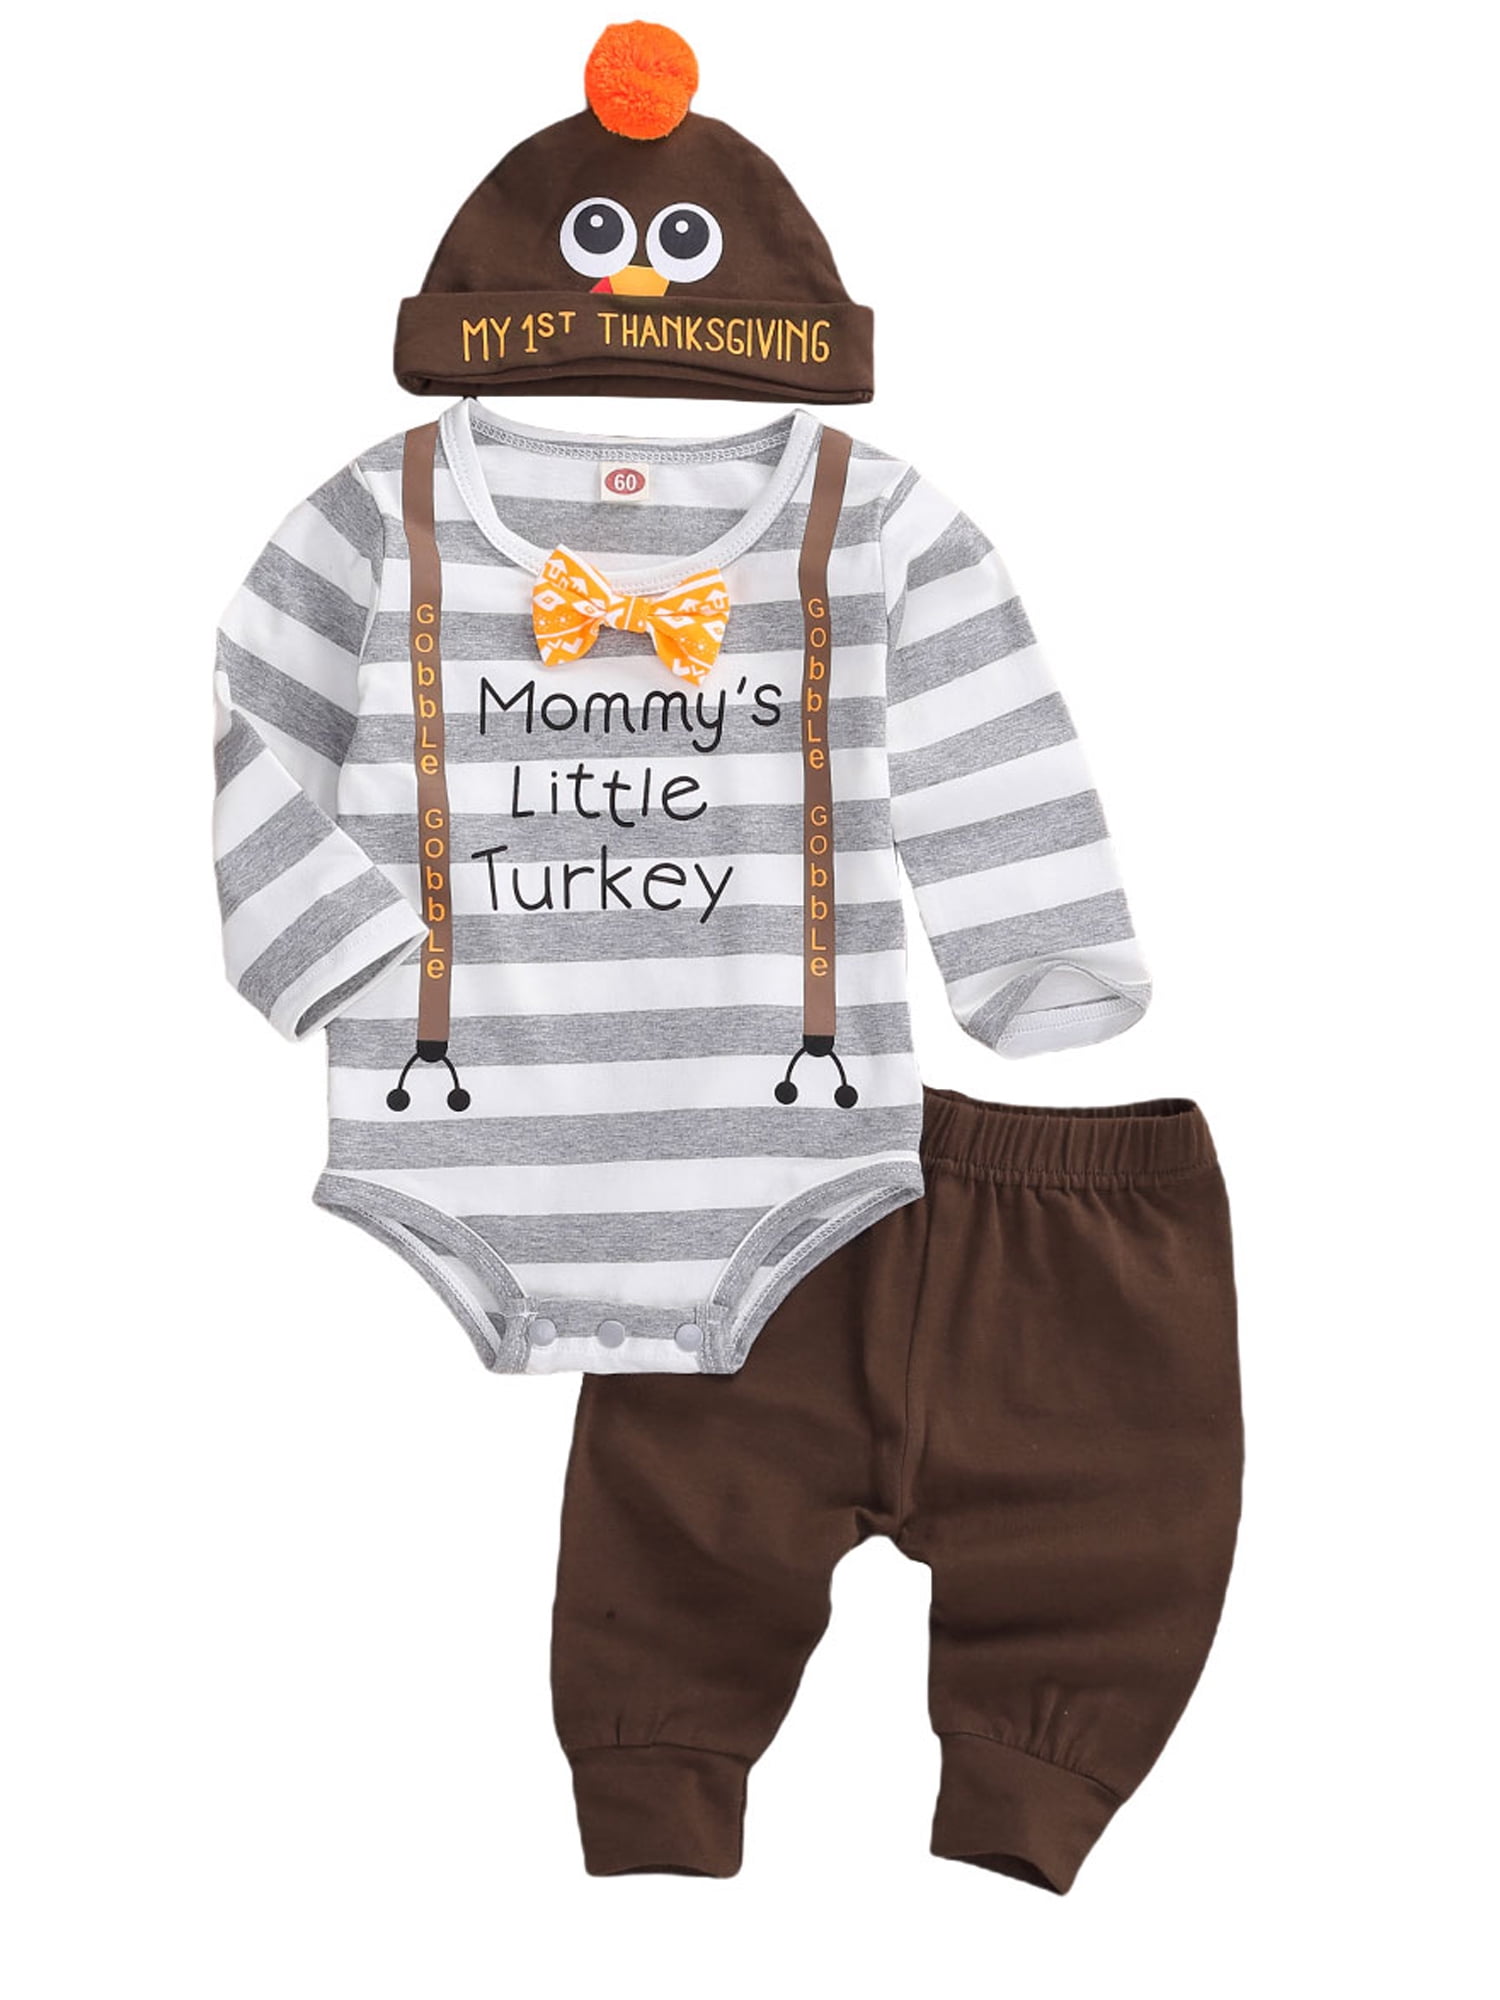 MOMTUESDAYS2 Infant Baby Boy Girl Thanksgiving Jumpsuit Long Sleeve Hooded Striped Romper Christmas Clothes Outfit 